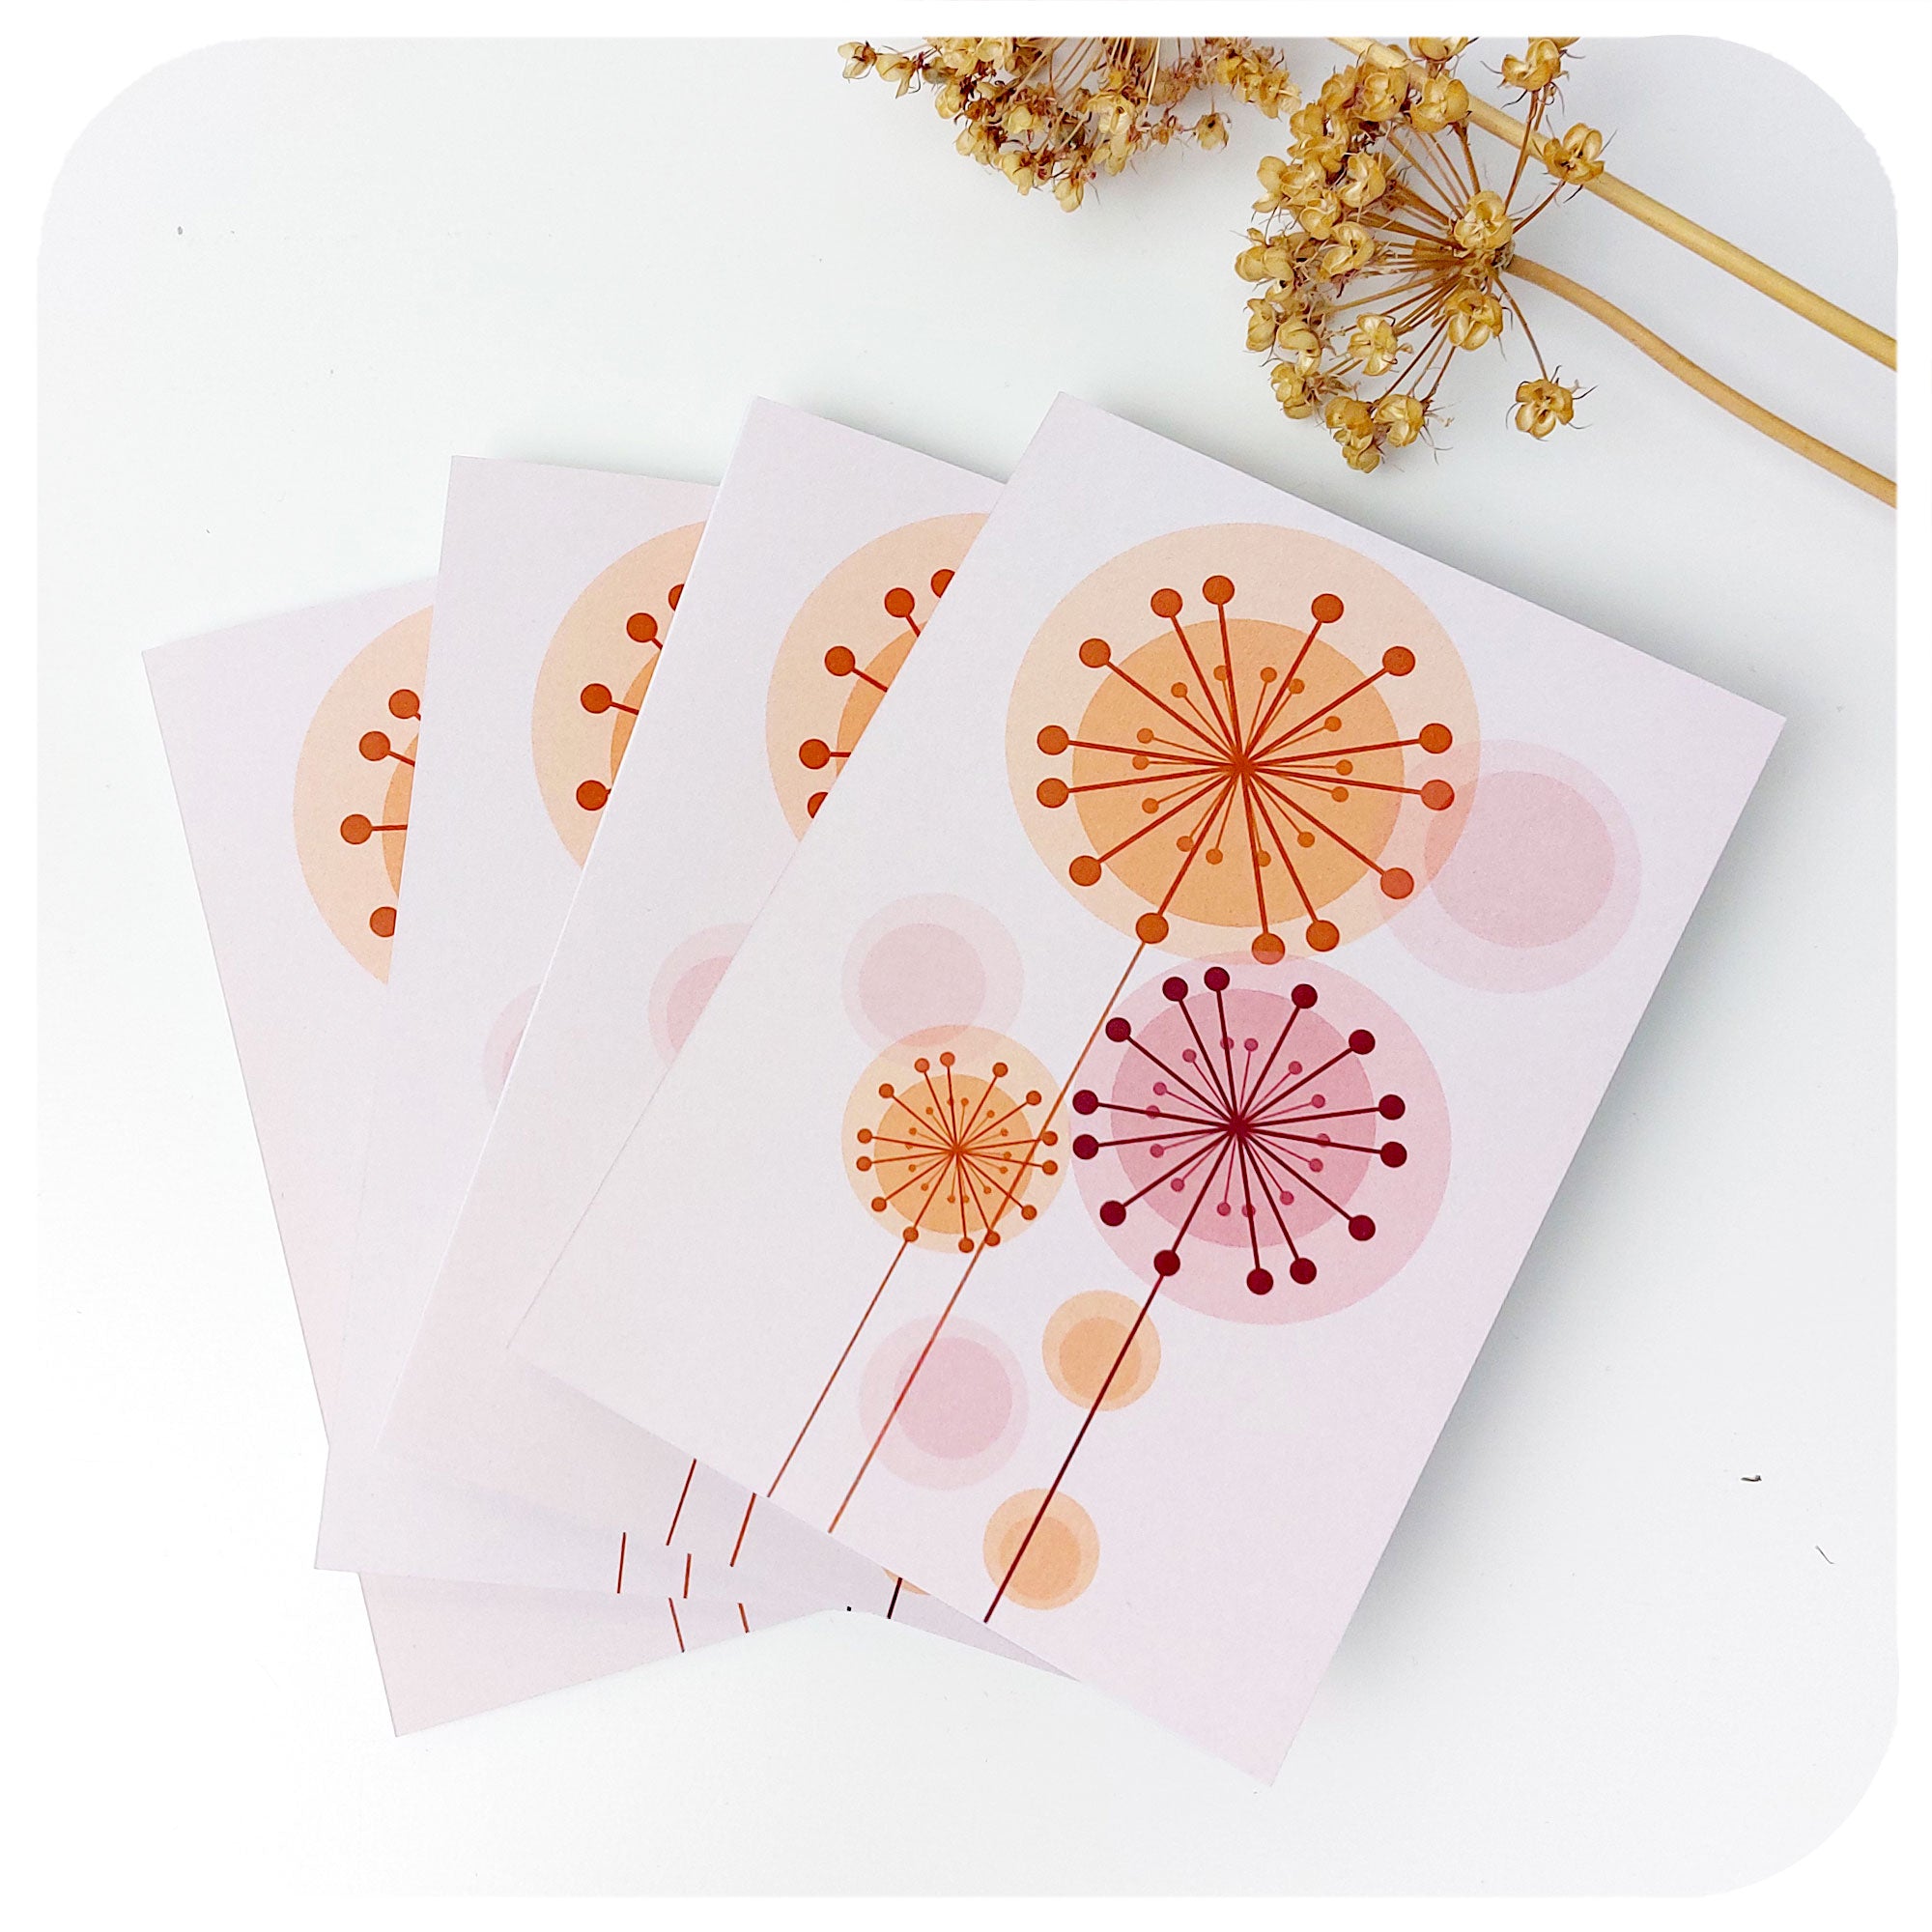 Retro Alliums Blank Greetings Cards - Pack of four, on table with dried alliums | The Inkabilly Emporium